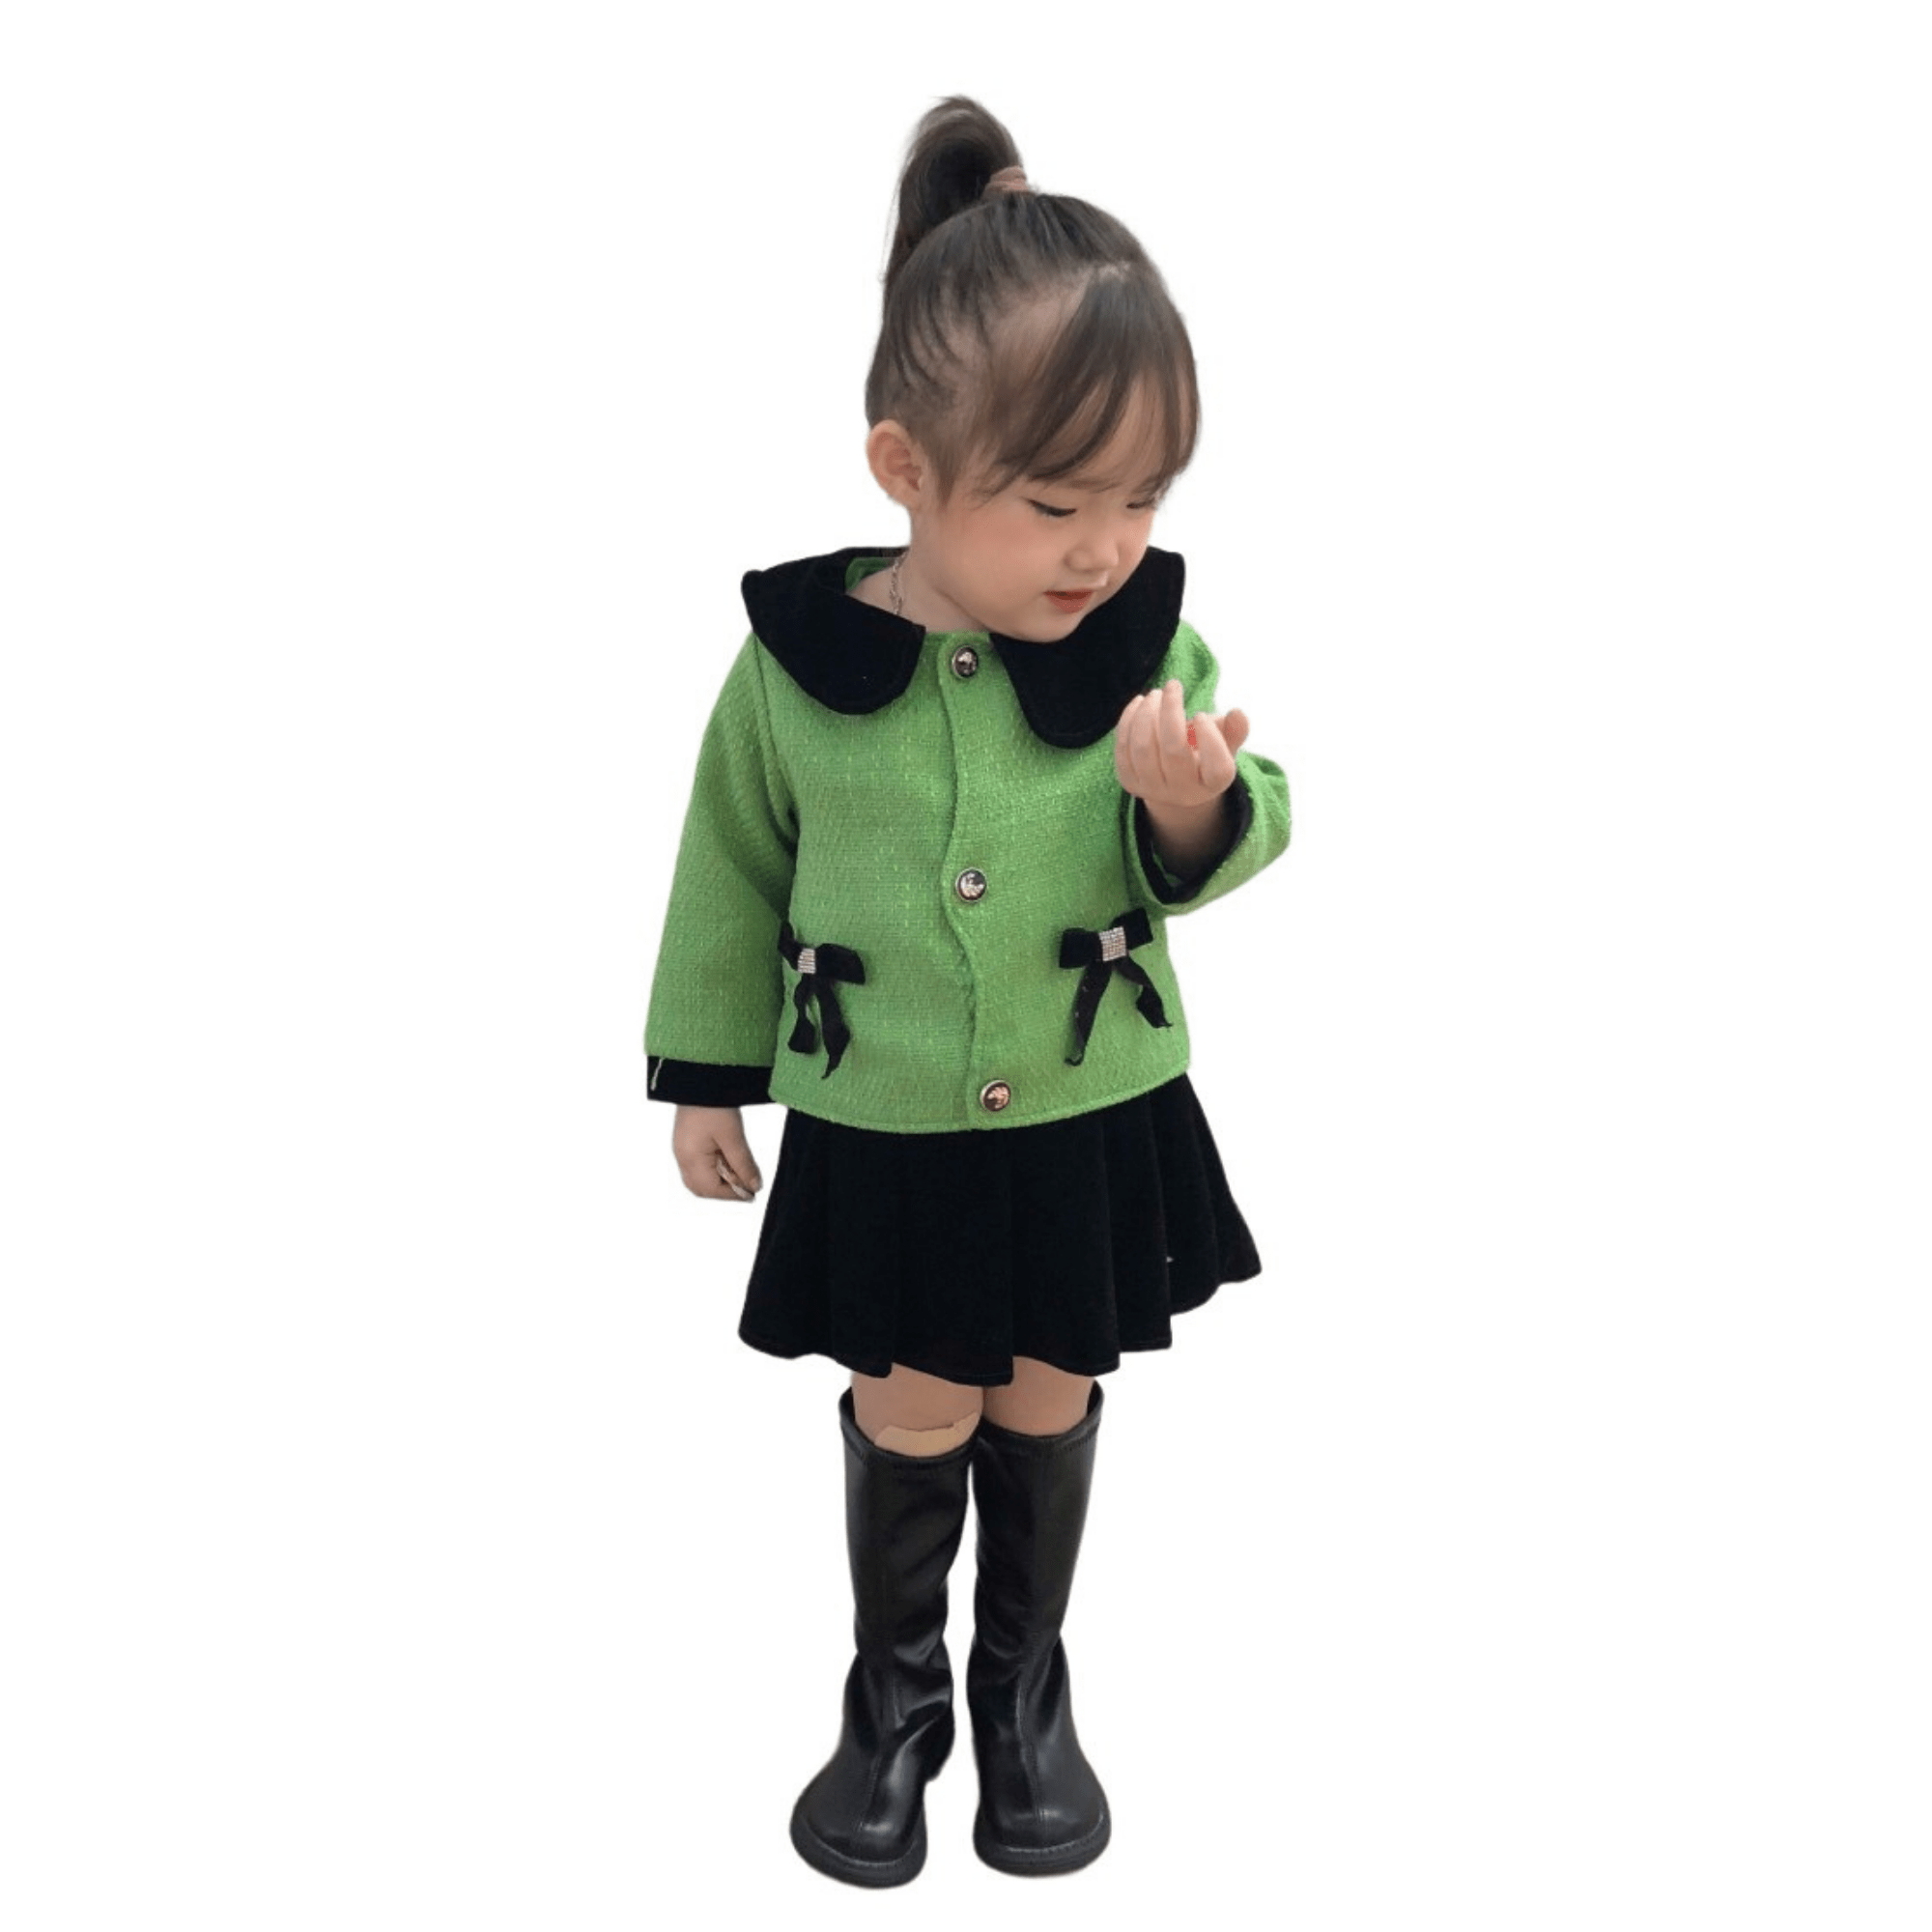 Kids Clothes Cabinet Comfortable 100% Wool Dresses Casual Each One In Opp Bag Made In Vietnam Manufacturer